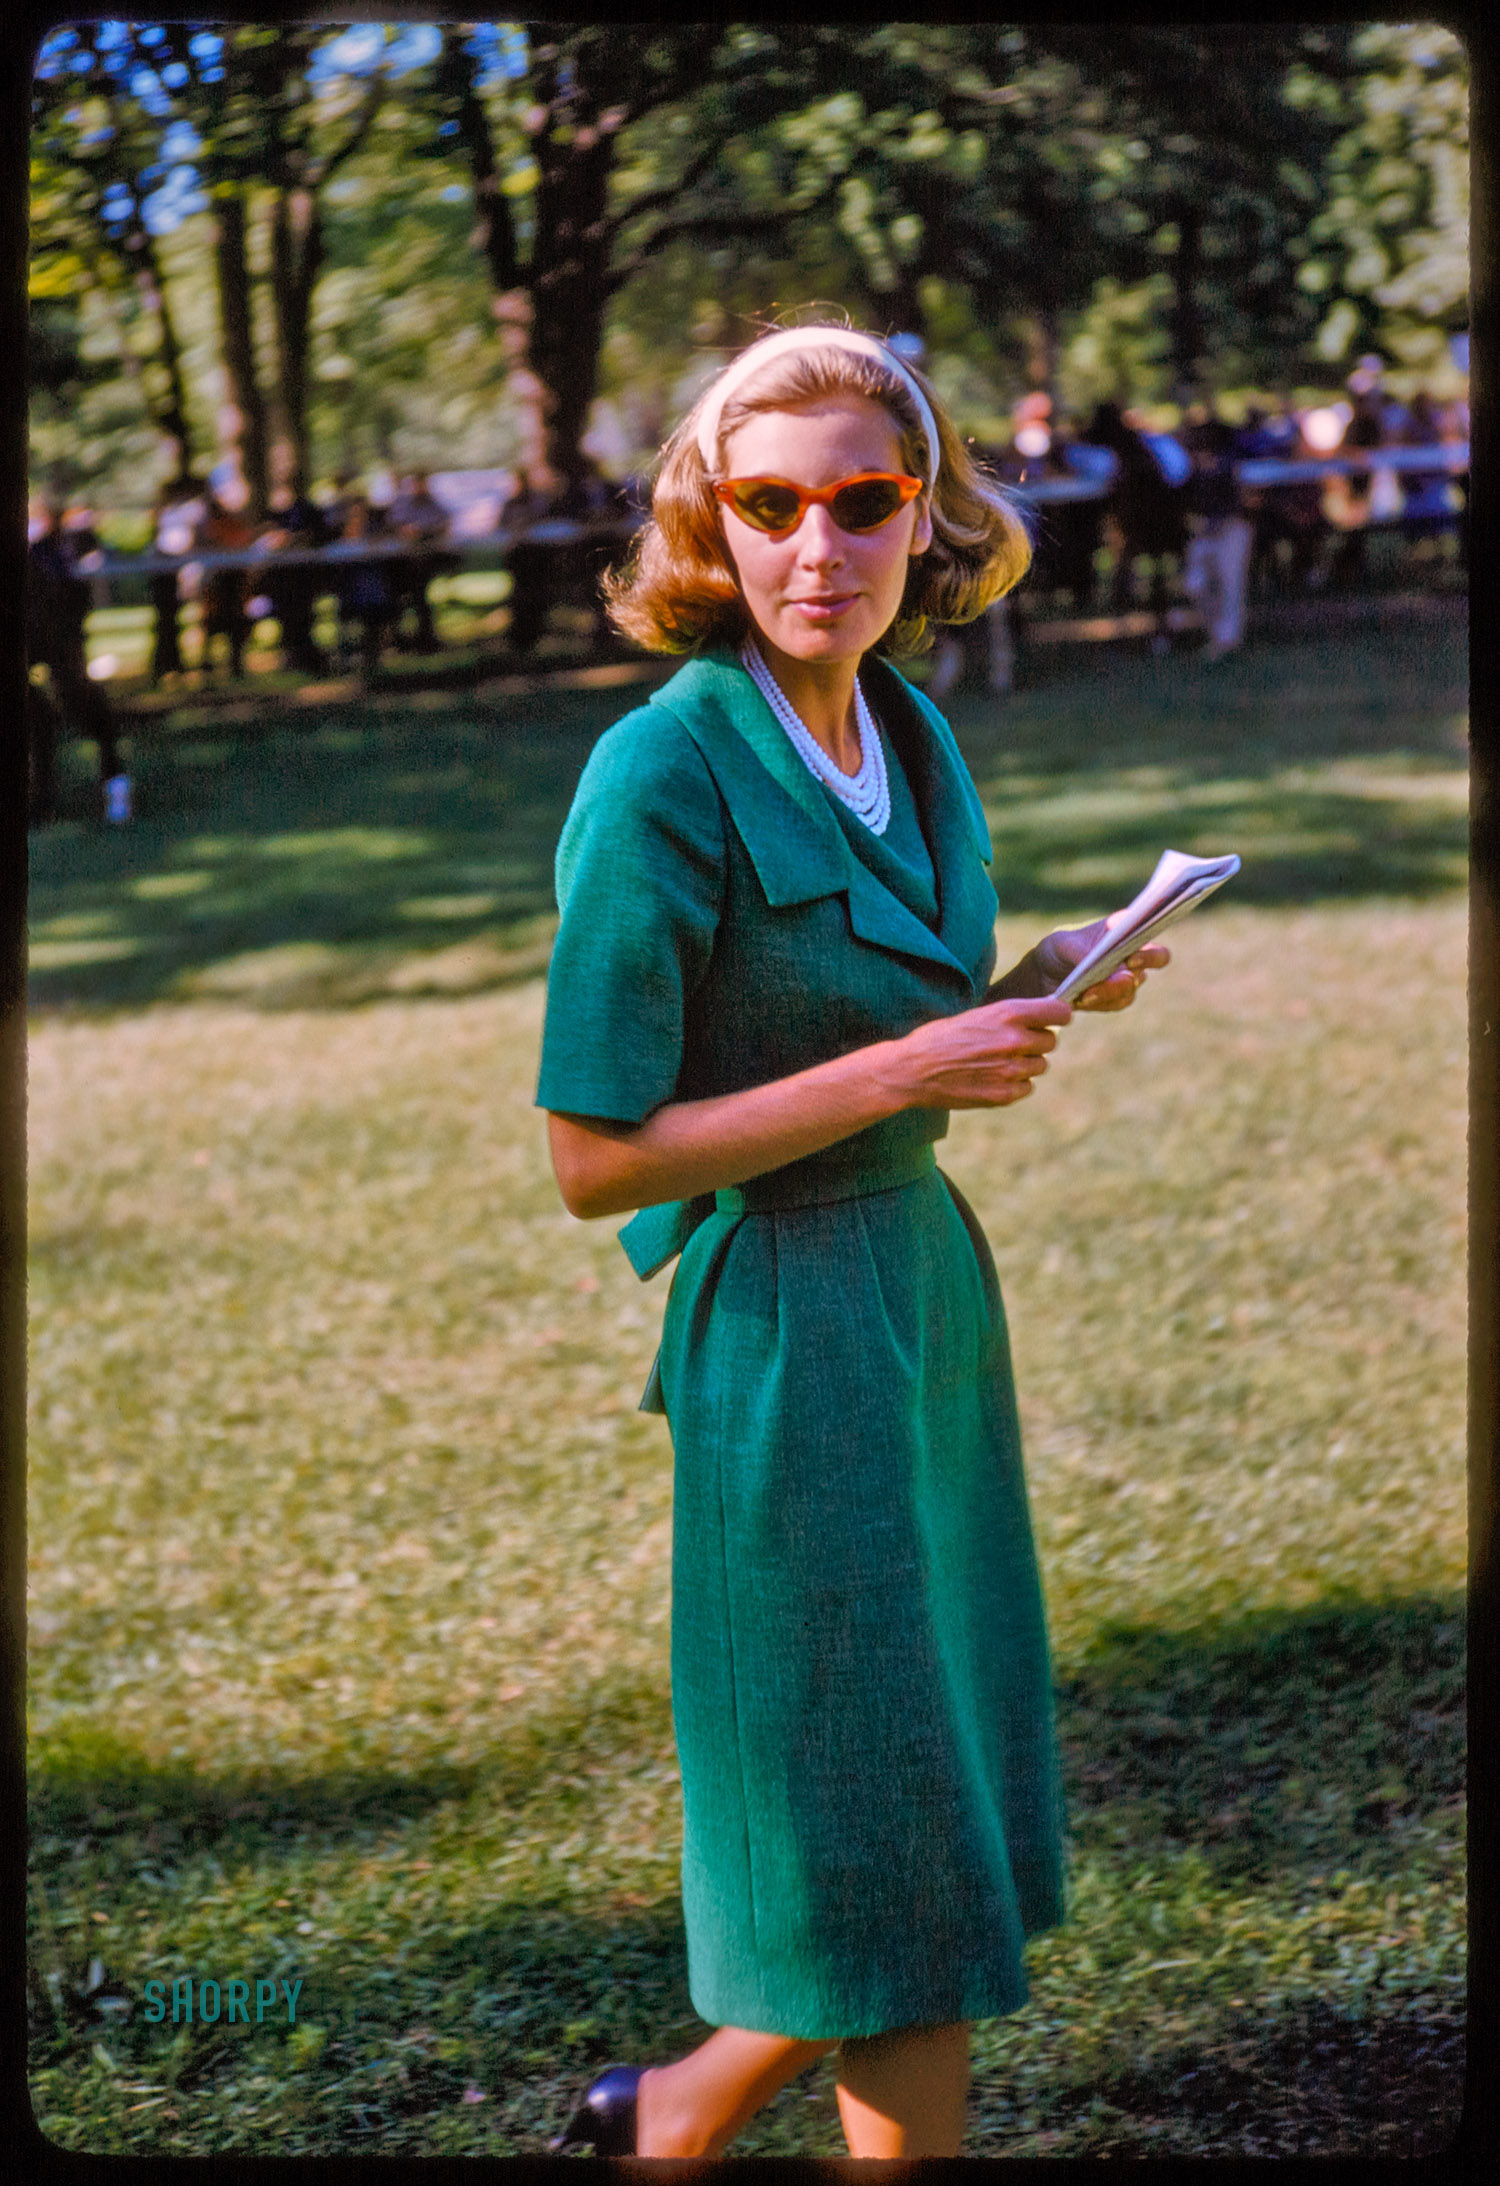 August 1960. Saratoga Springs, New York. An uncaptioned Kodachrome snapped by Toni Frissell for the Sports Illustrated assignment "Saratoga: Where Horse Is King." View full size.